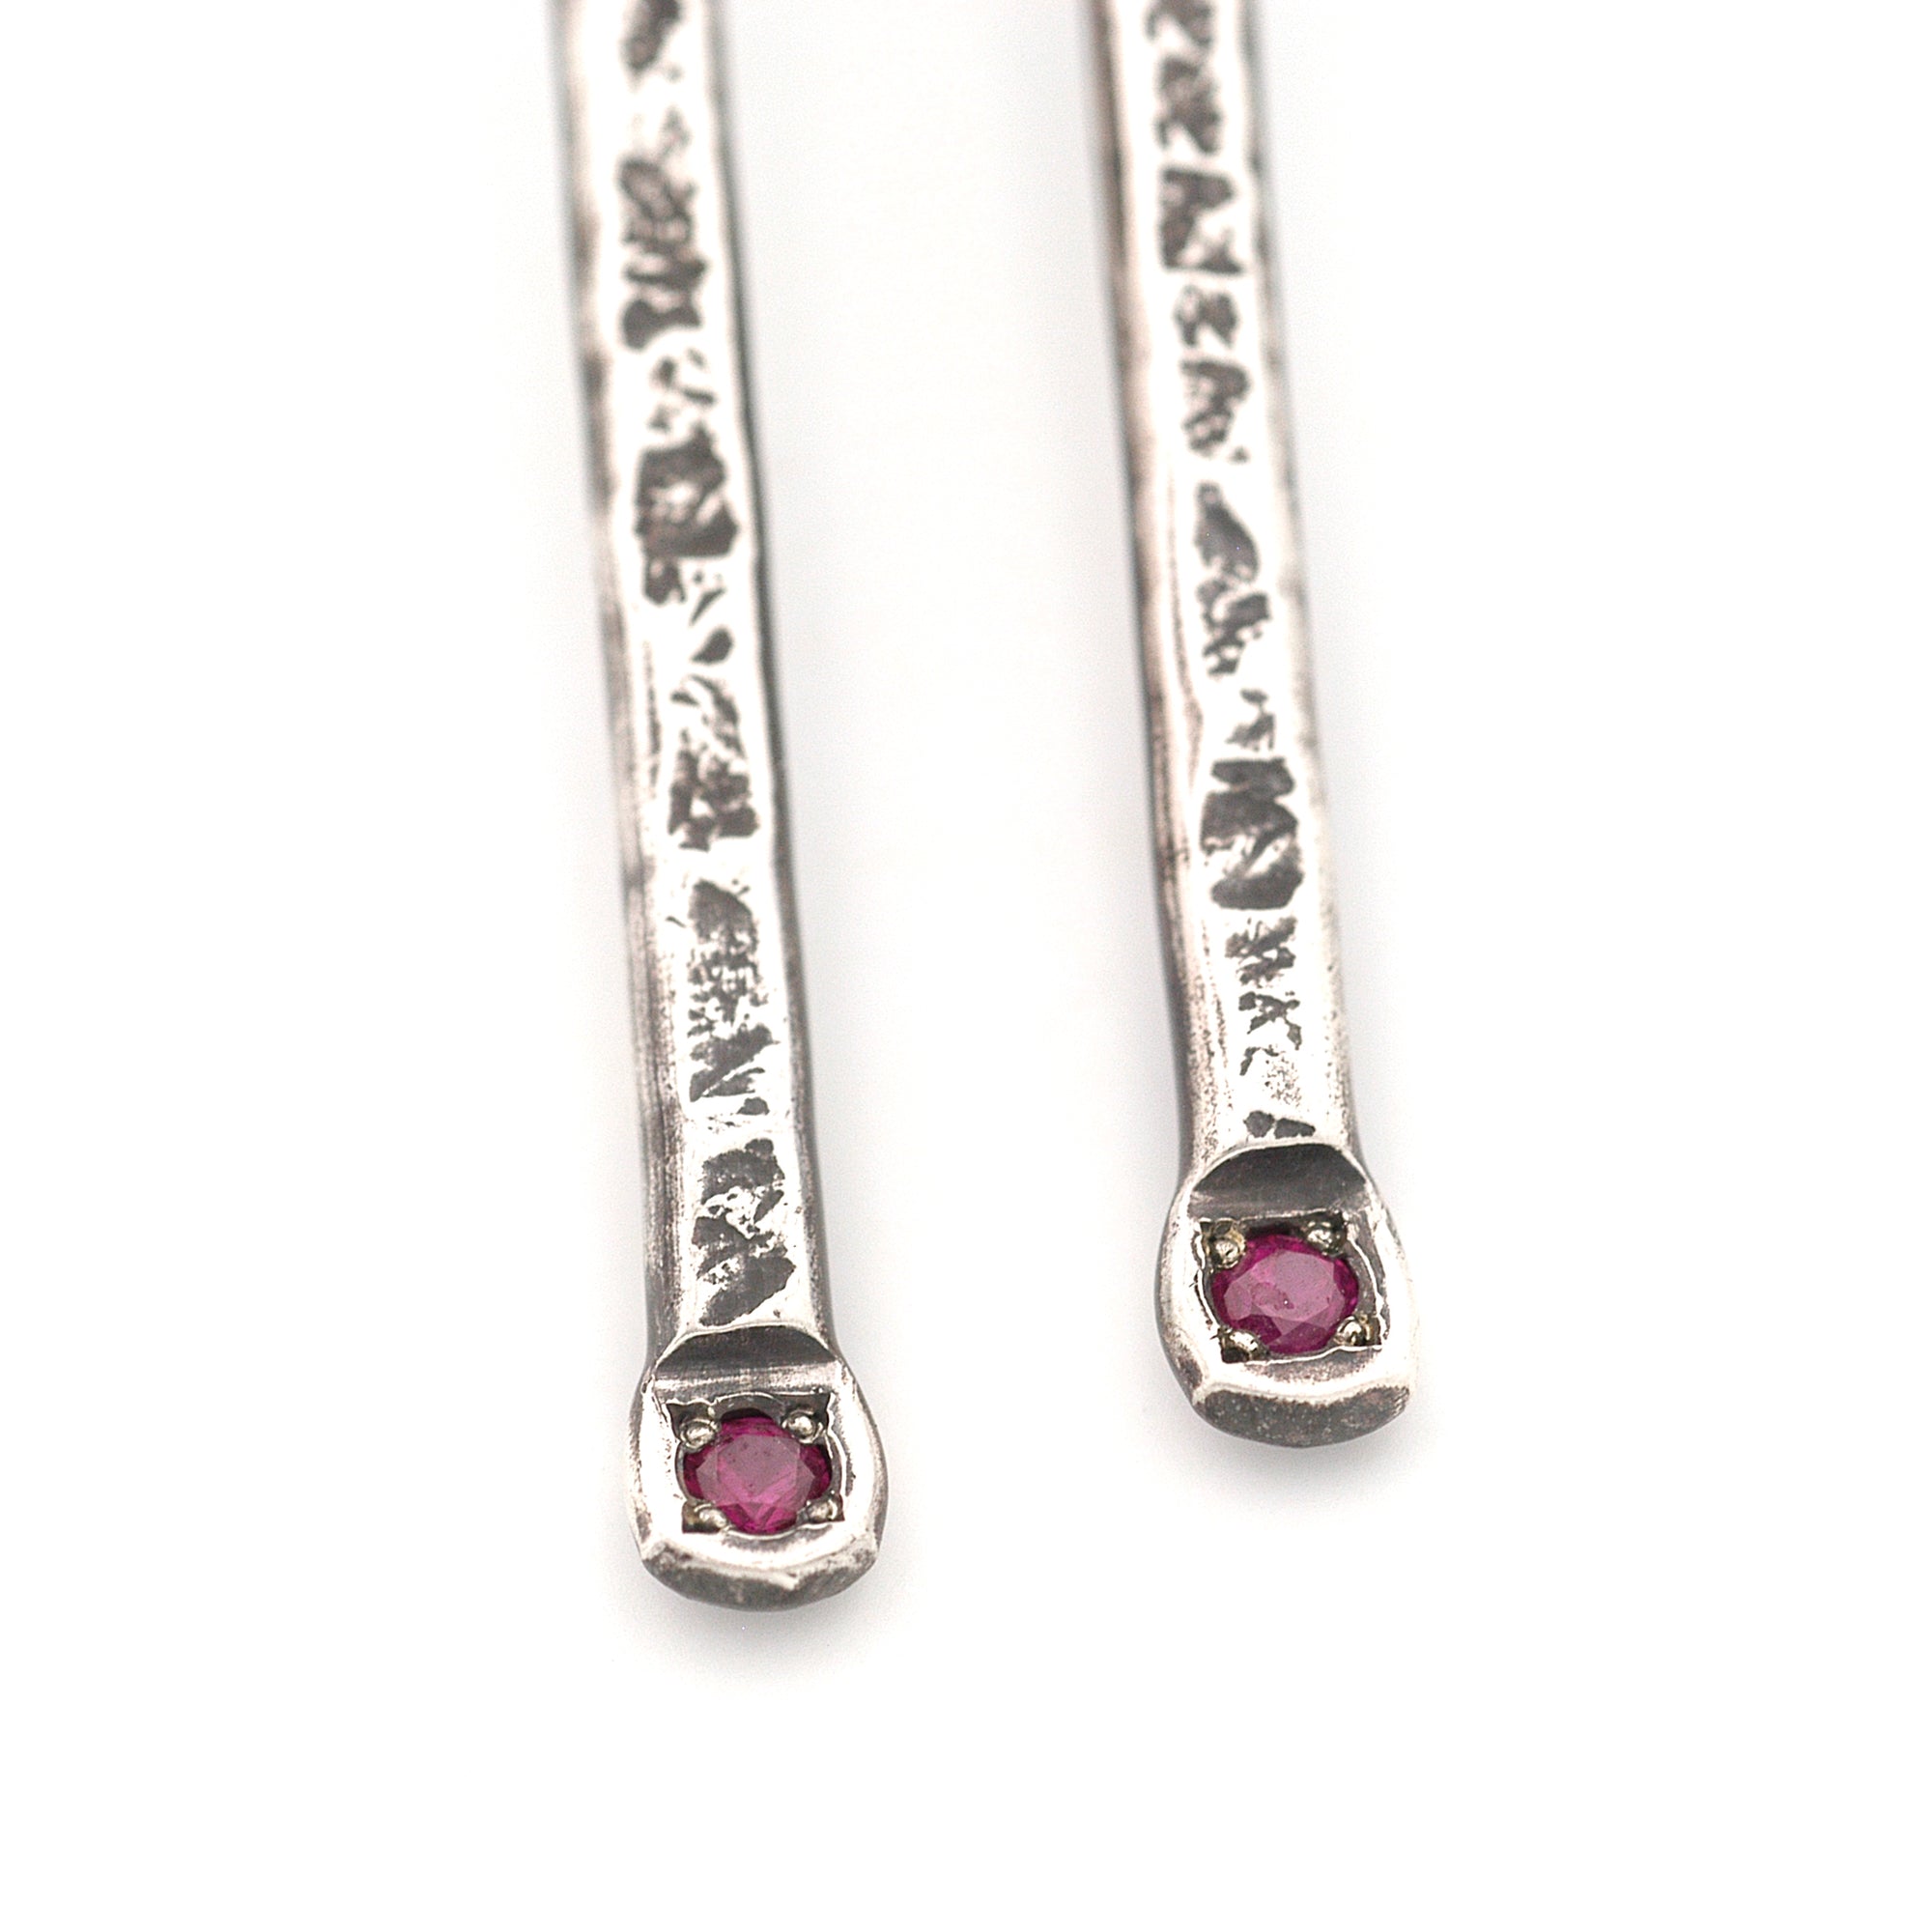 Textured Stick Earrings with Rubies